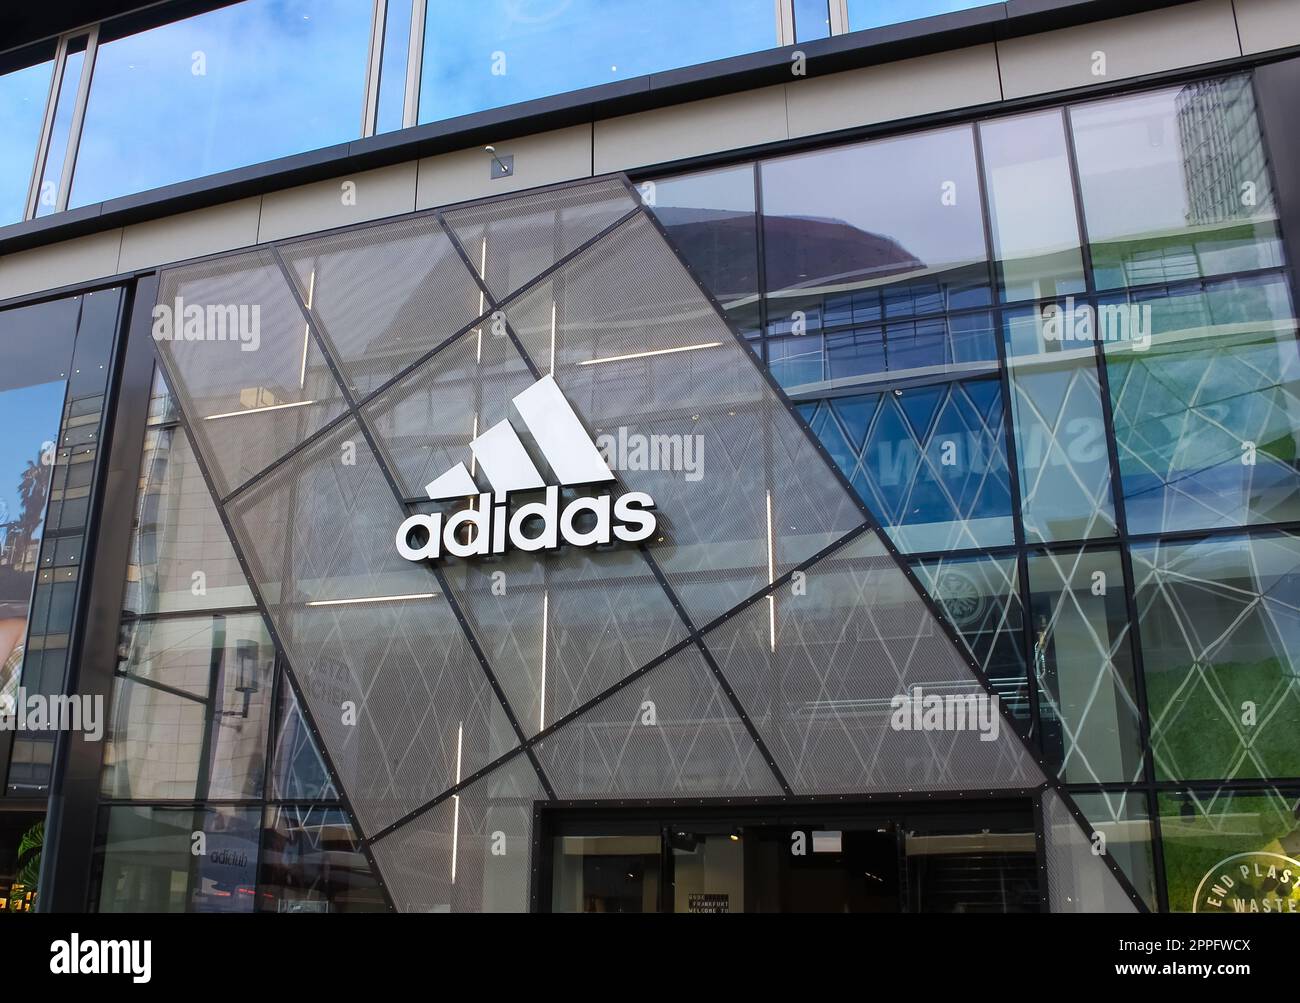 The facade of the Adidas store in Frankfurt am Main, Germany Stock Photo